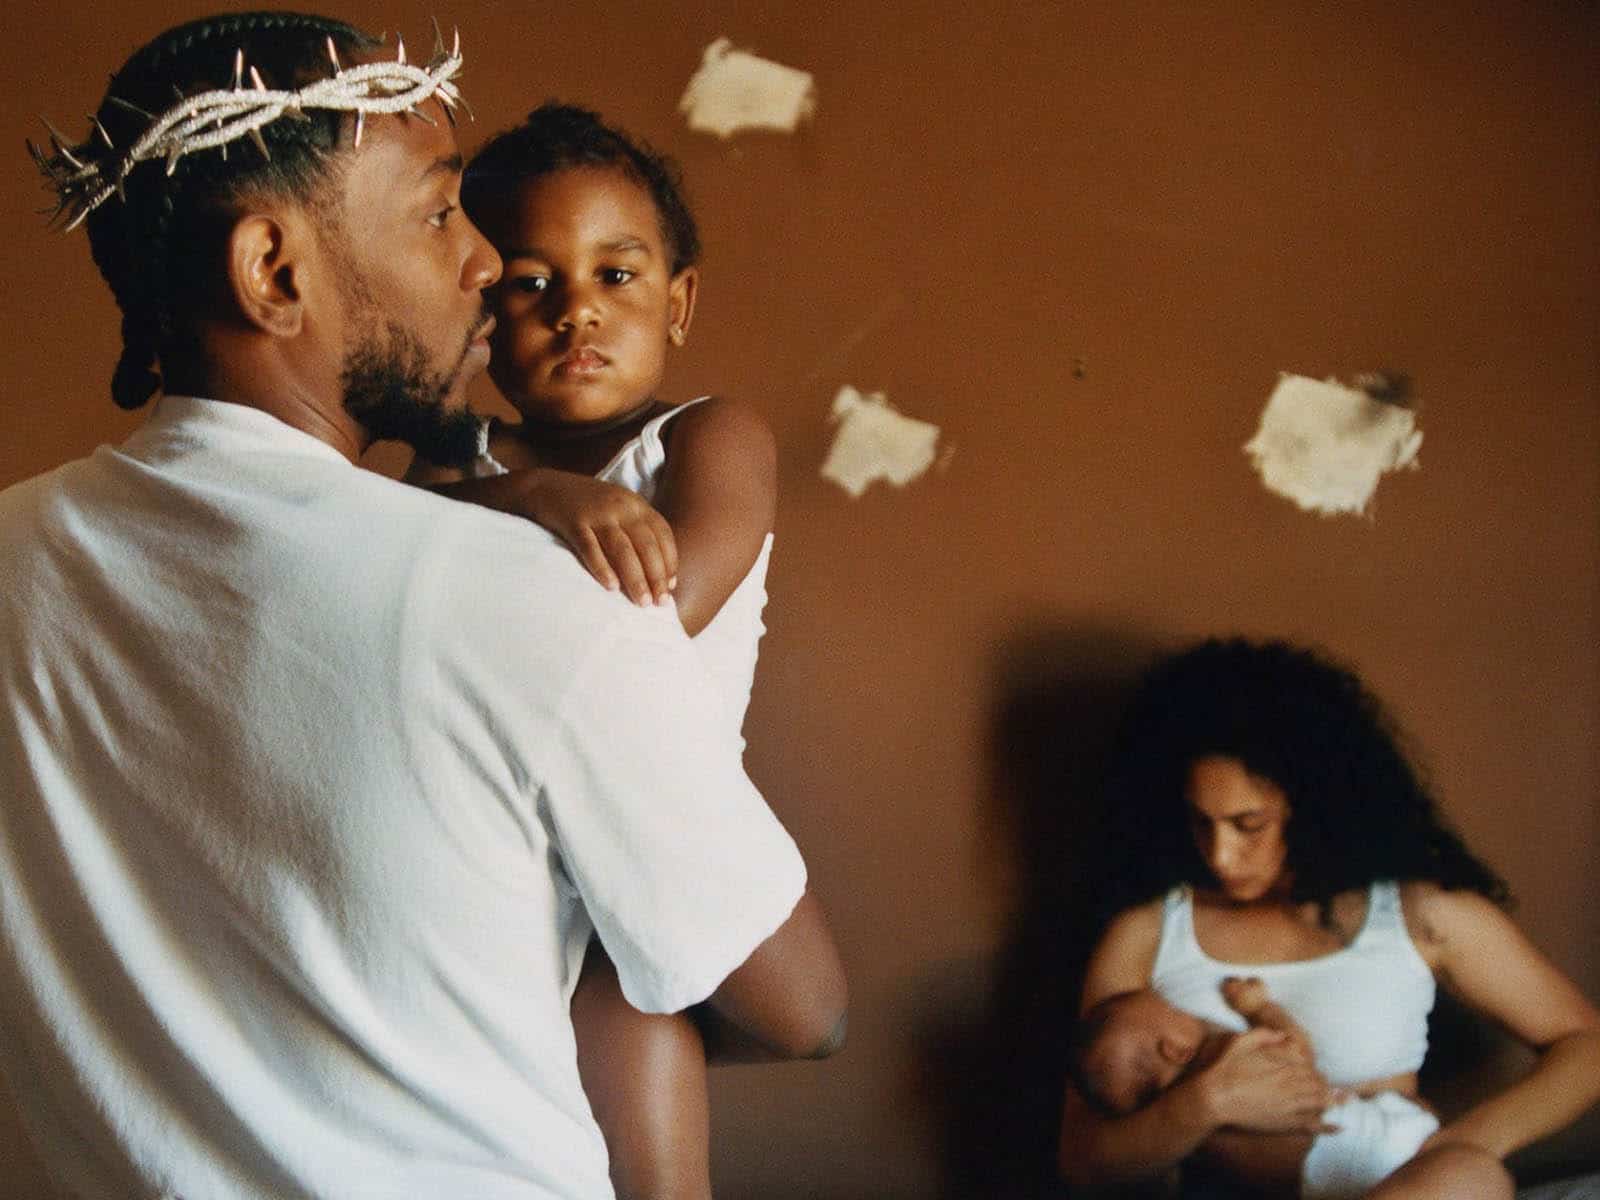 Kendrick Lamar finally releases Mr. Morale & The Big Steppers